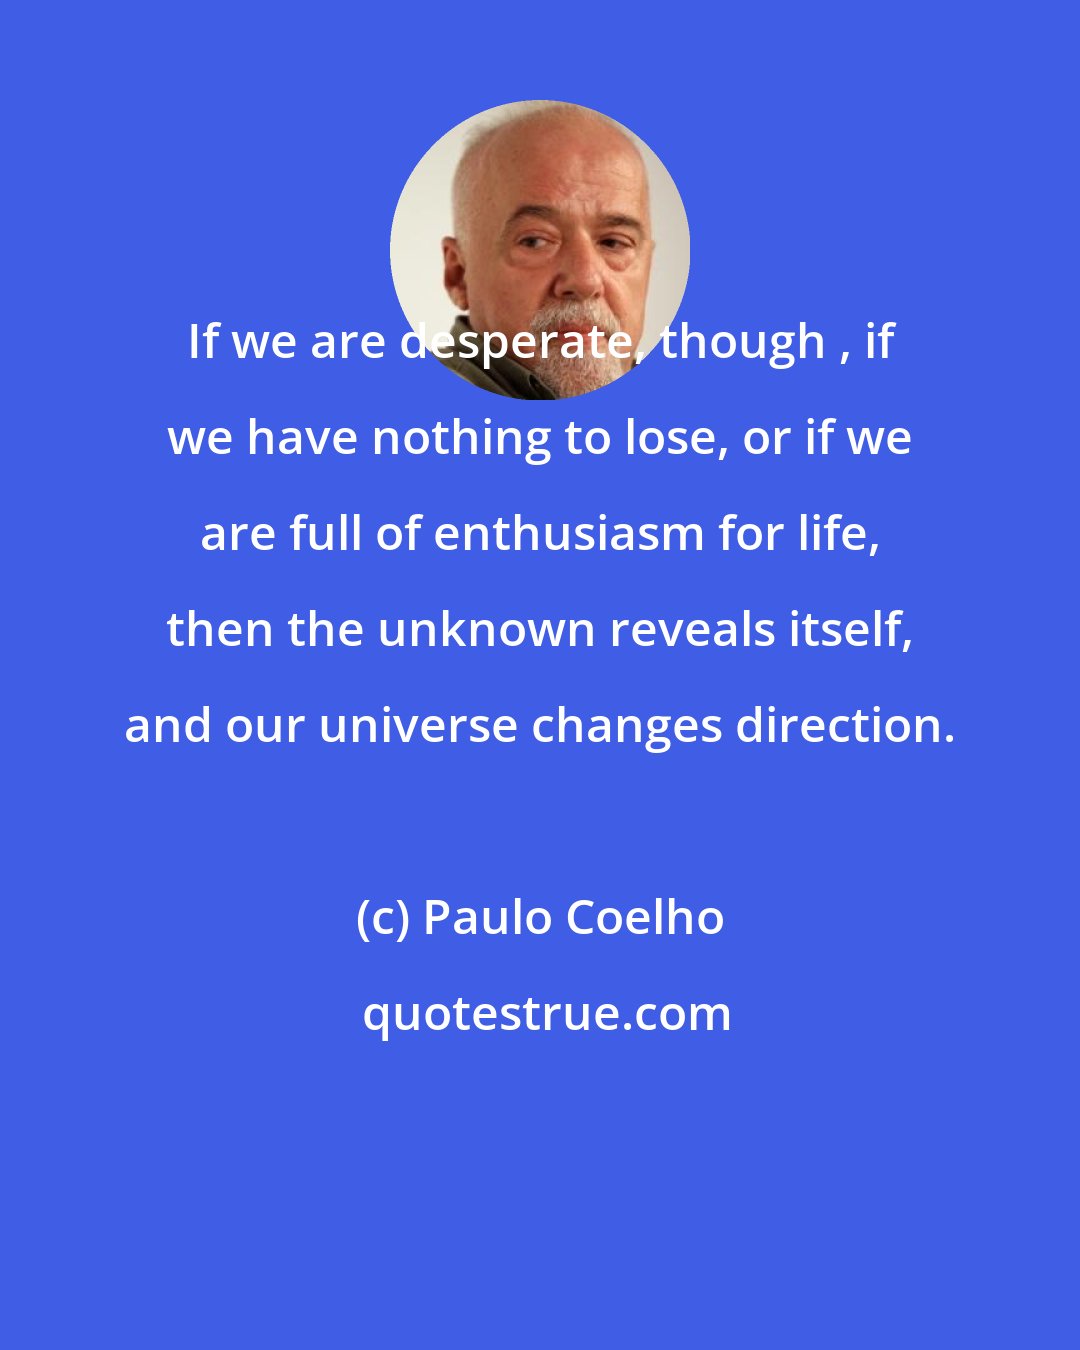 Paulo Coelho: If we are desperate, though , if we have nothing to lose, or if we are full of enthusiasm for life, then the unknown reveals itself, and our universe changes direction.